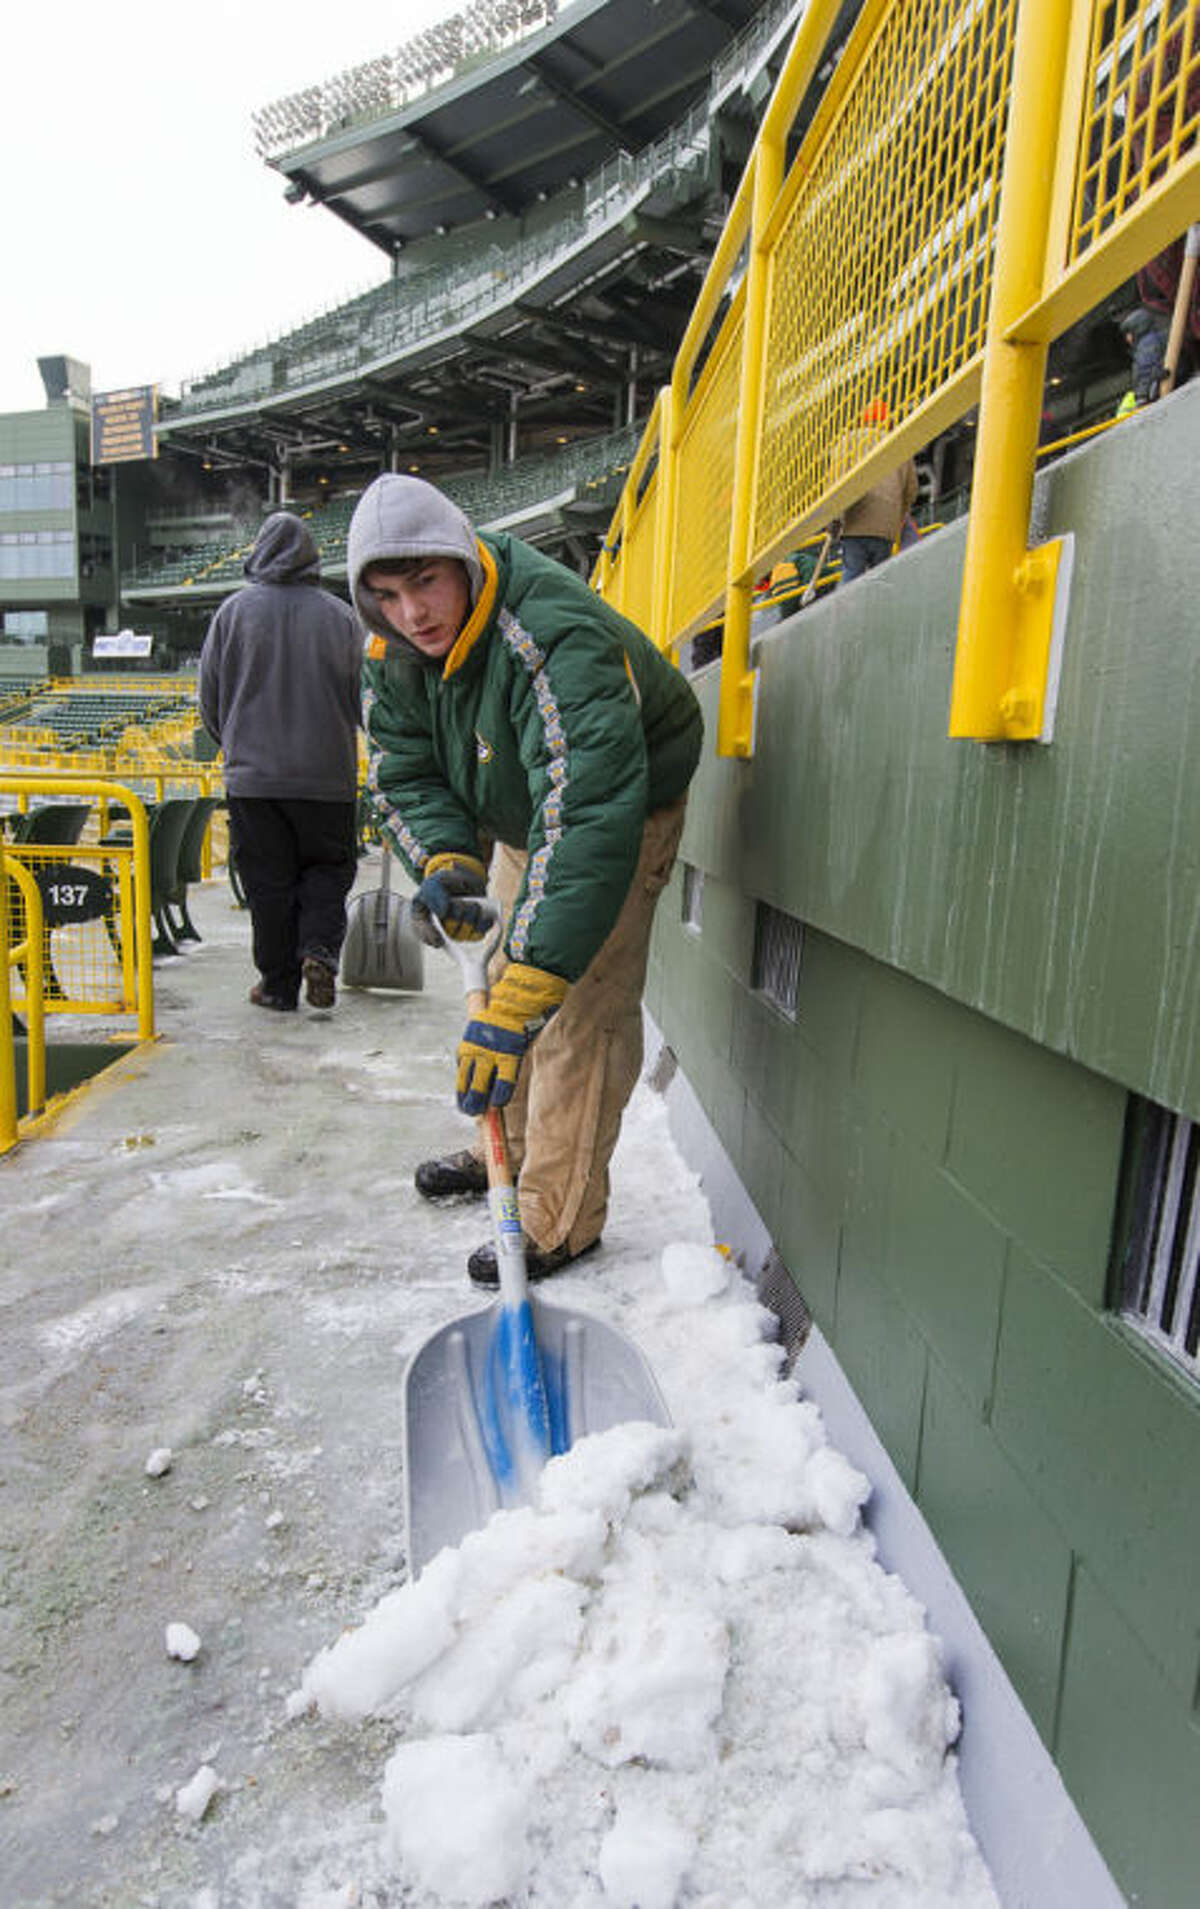 James Diedrick helps clear ice and snow from the seats at Lambeau Field on Friday, Jan. 3, 2014, in Green Bay, Wis., in preparation for Sunday's NFL football wild-card playoff game between the Green Bay Packers and San Francisco 49ers. (AP Photo/Mike Roemer)